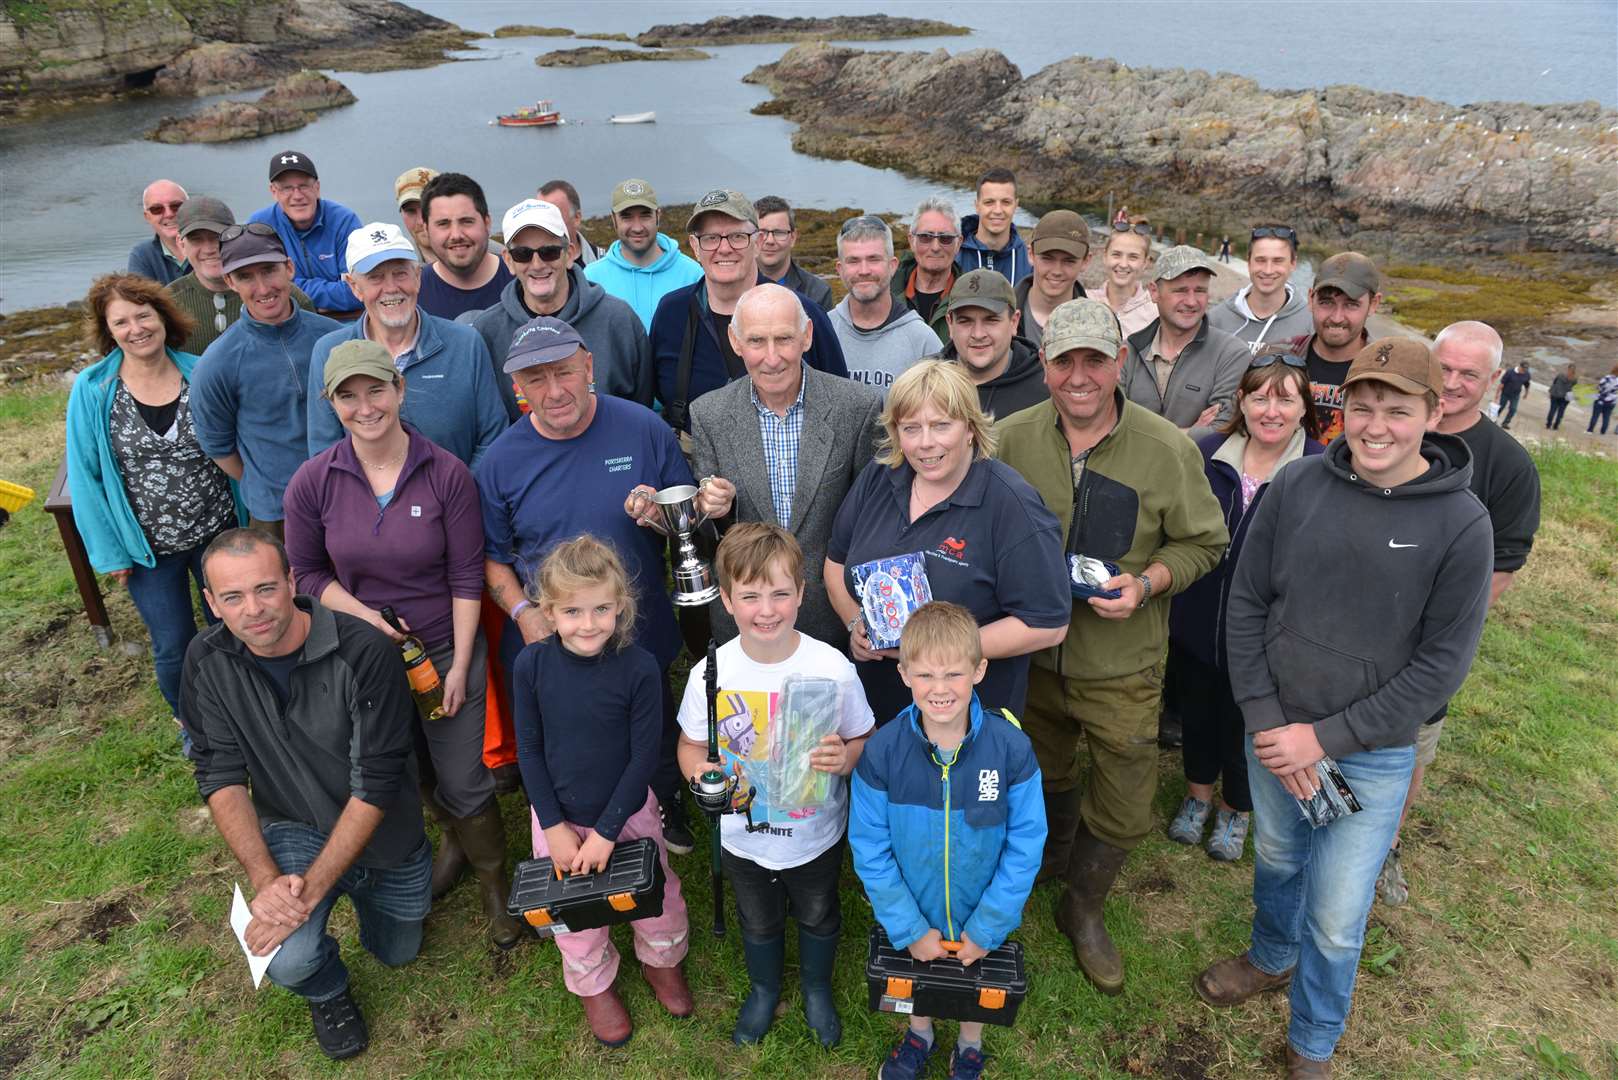 All of the anglers involved with prize winners in the front row together with William Macdonald, the senior member of the community who made the presentations.